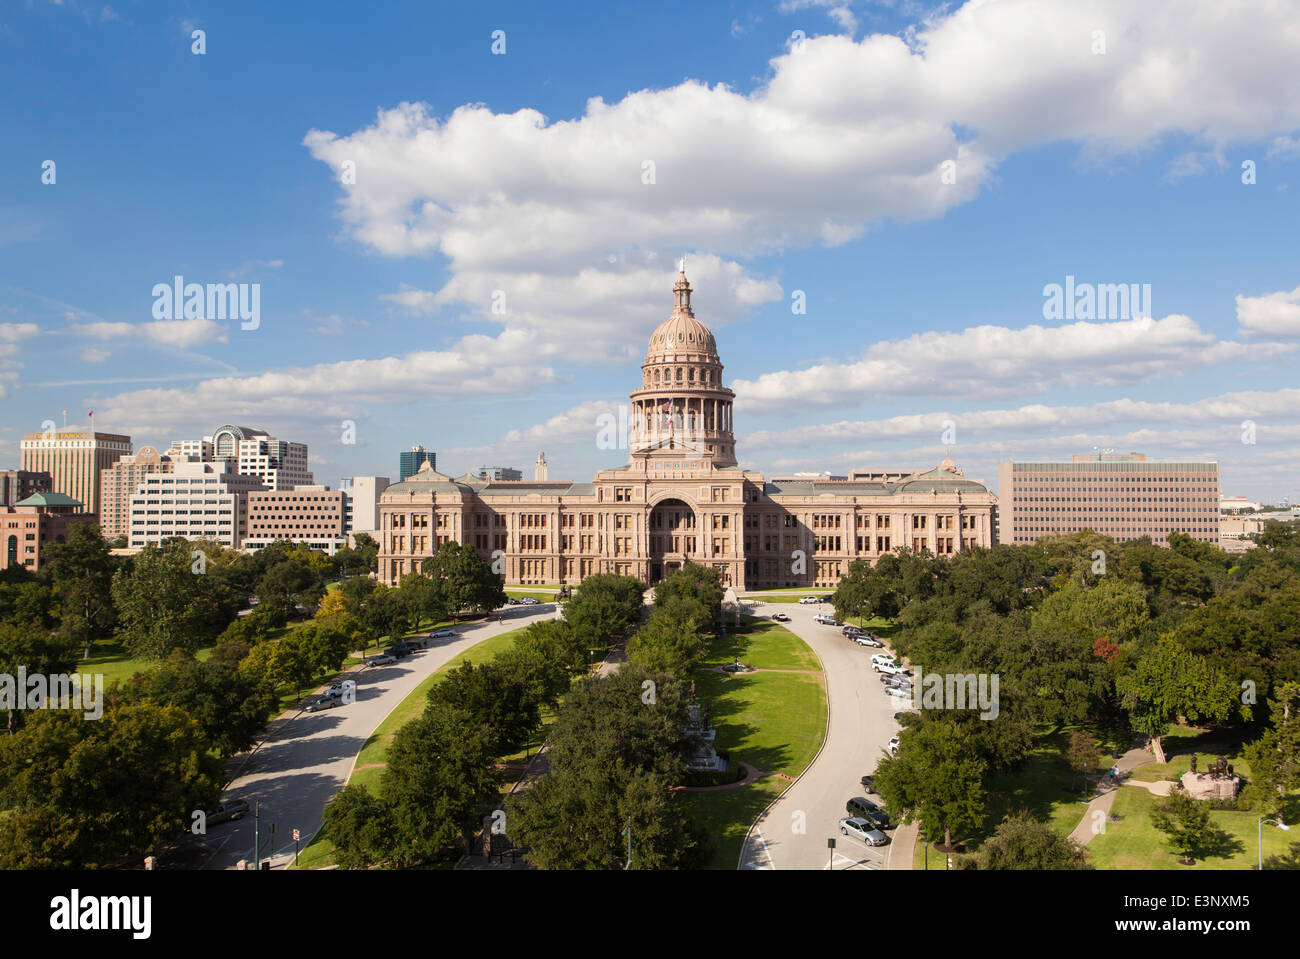 State Capital building, Austin, Texas, United States of America Stock Photo